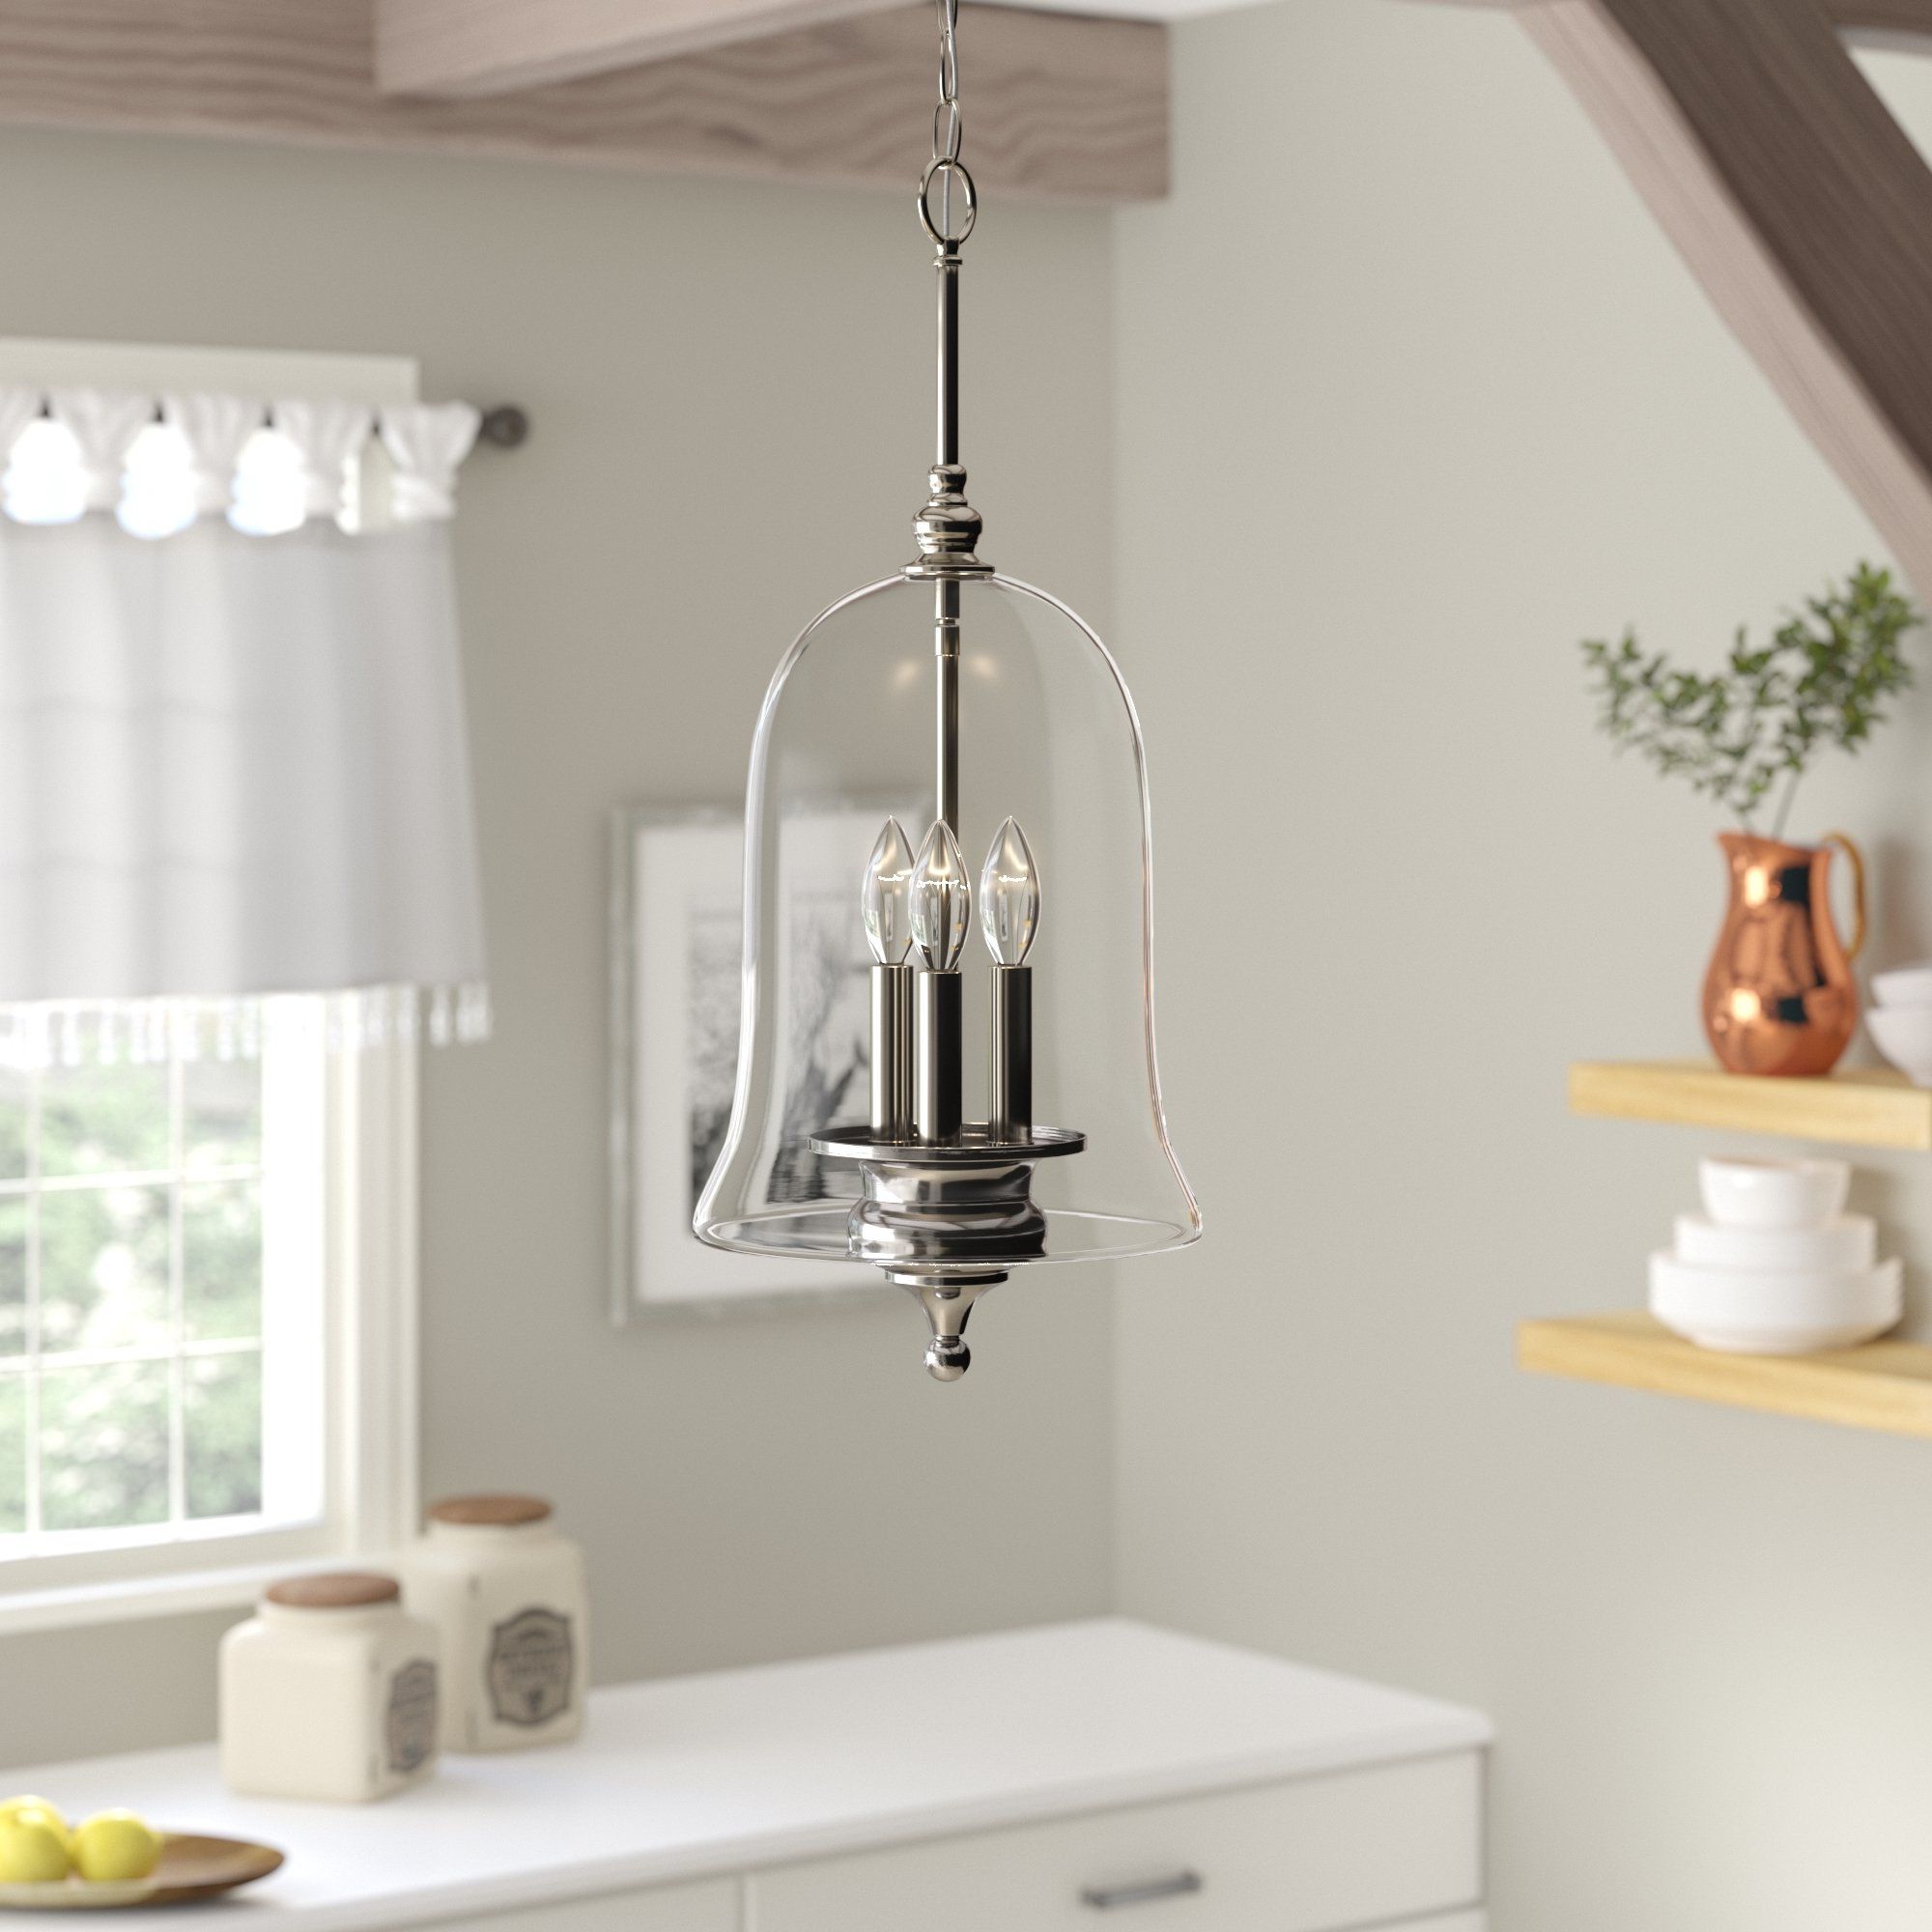 Warner Robins 3 Light Lantern Pendants Throughout Trendy Youngberg 3 Light Cone Pendant (View 5 of 25)